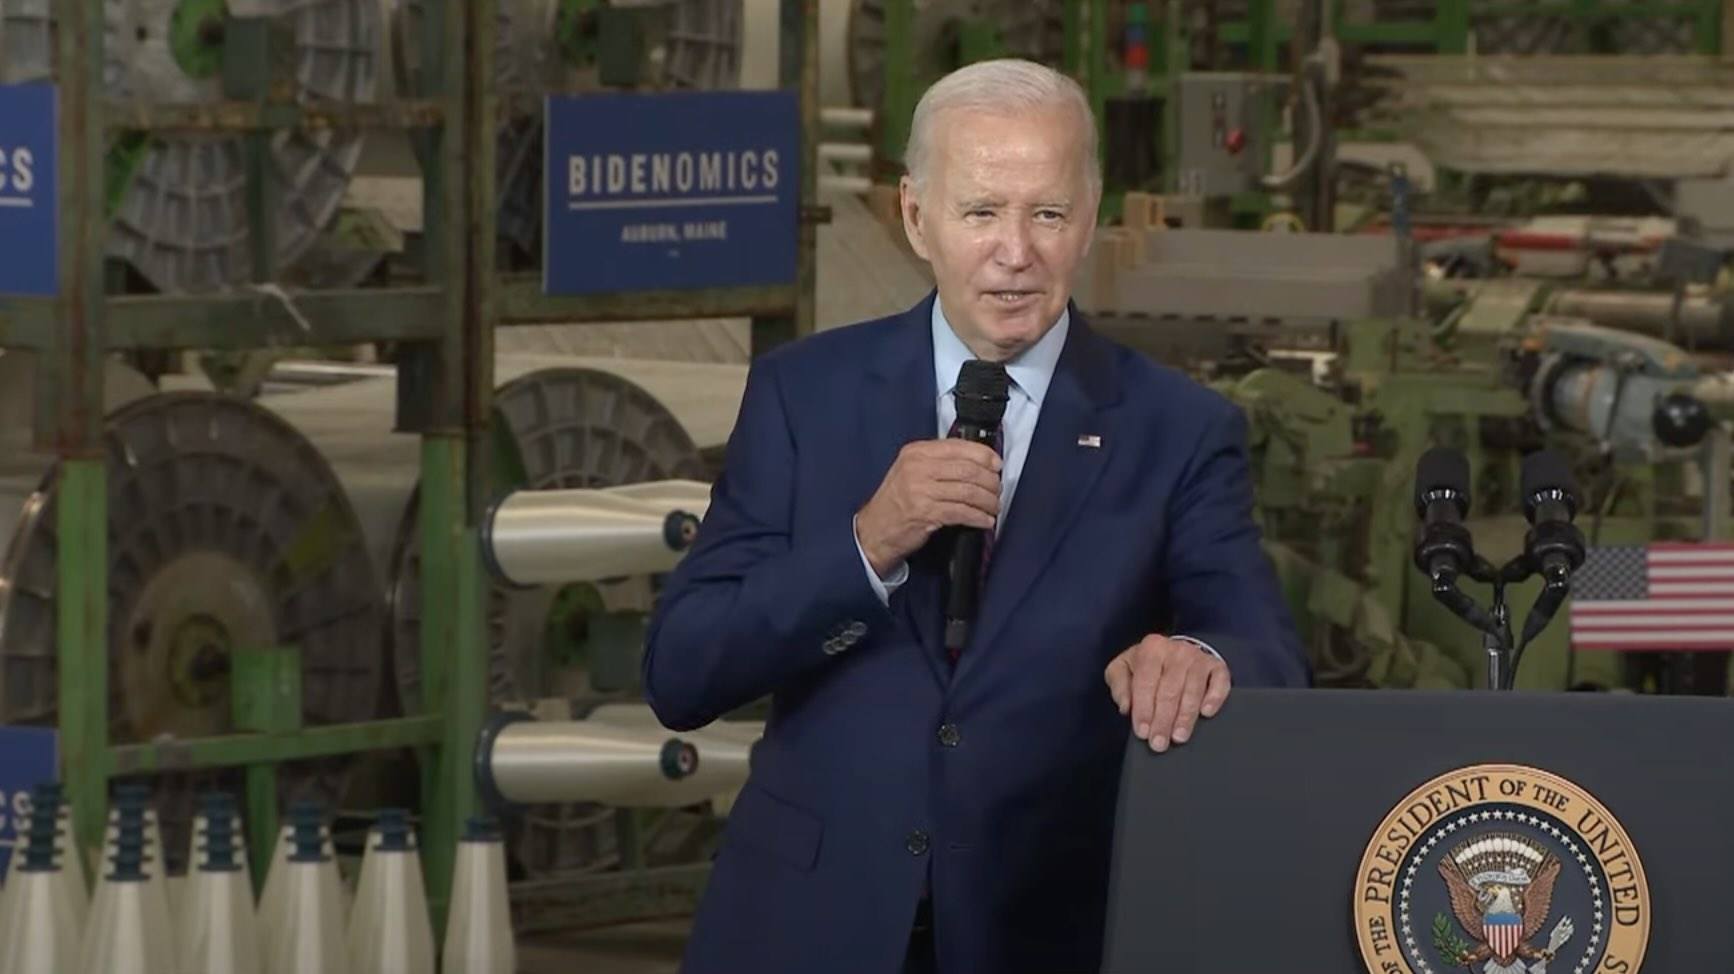 Biden’s Battle Cry Against Shrinkflation: Championing Consumer Rights Amid Soaring Food Costs